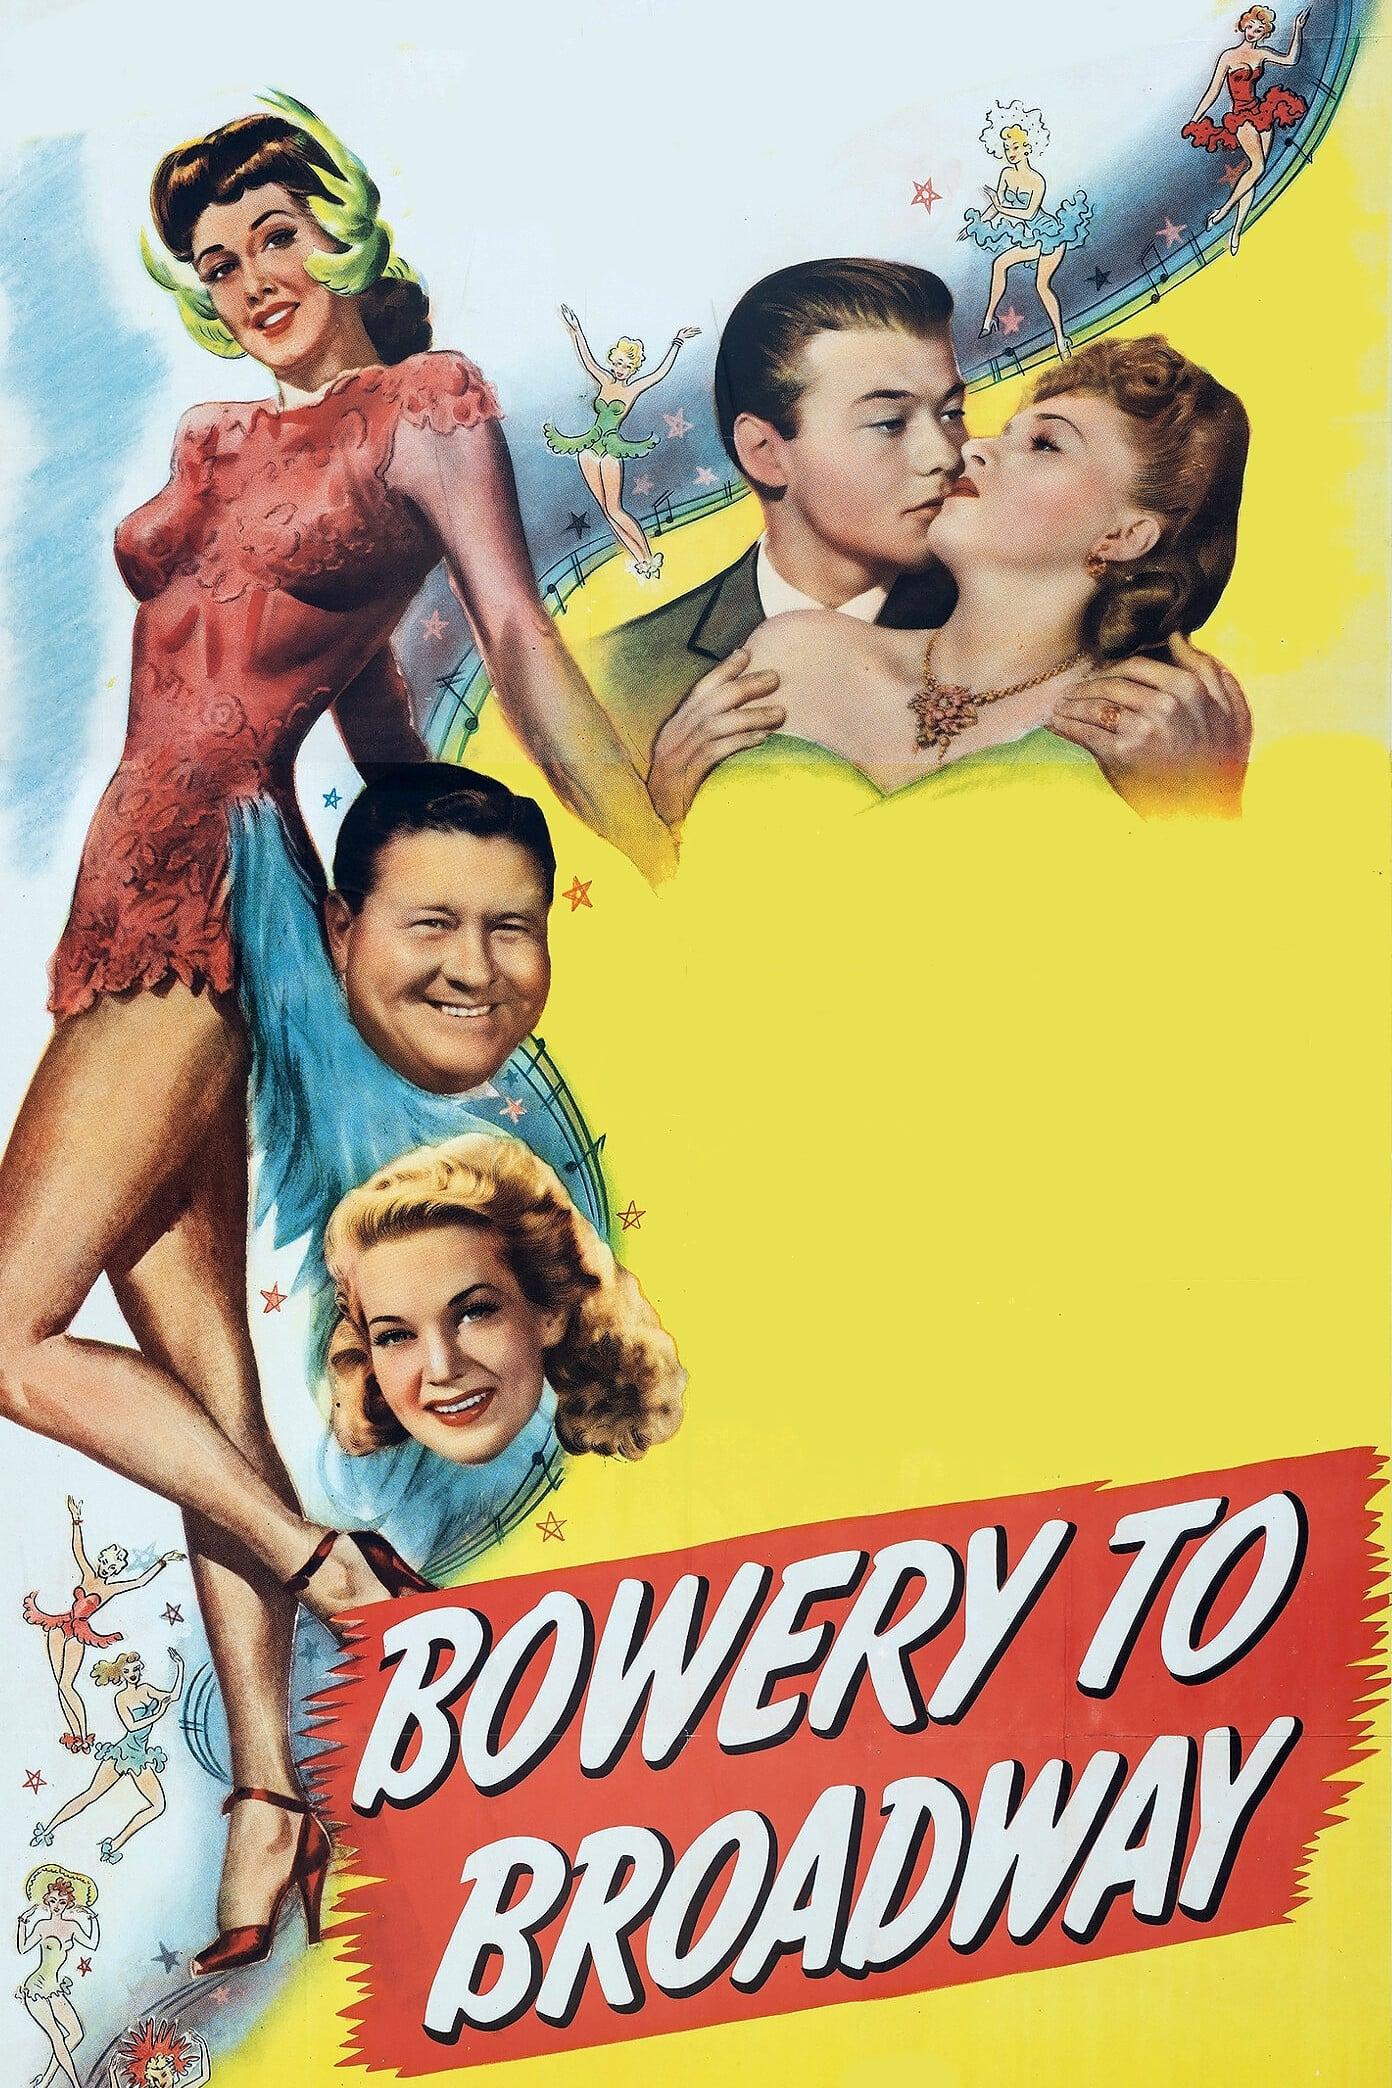 Bowery to Broadway poster